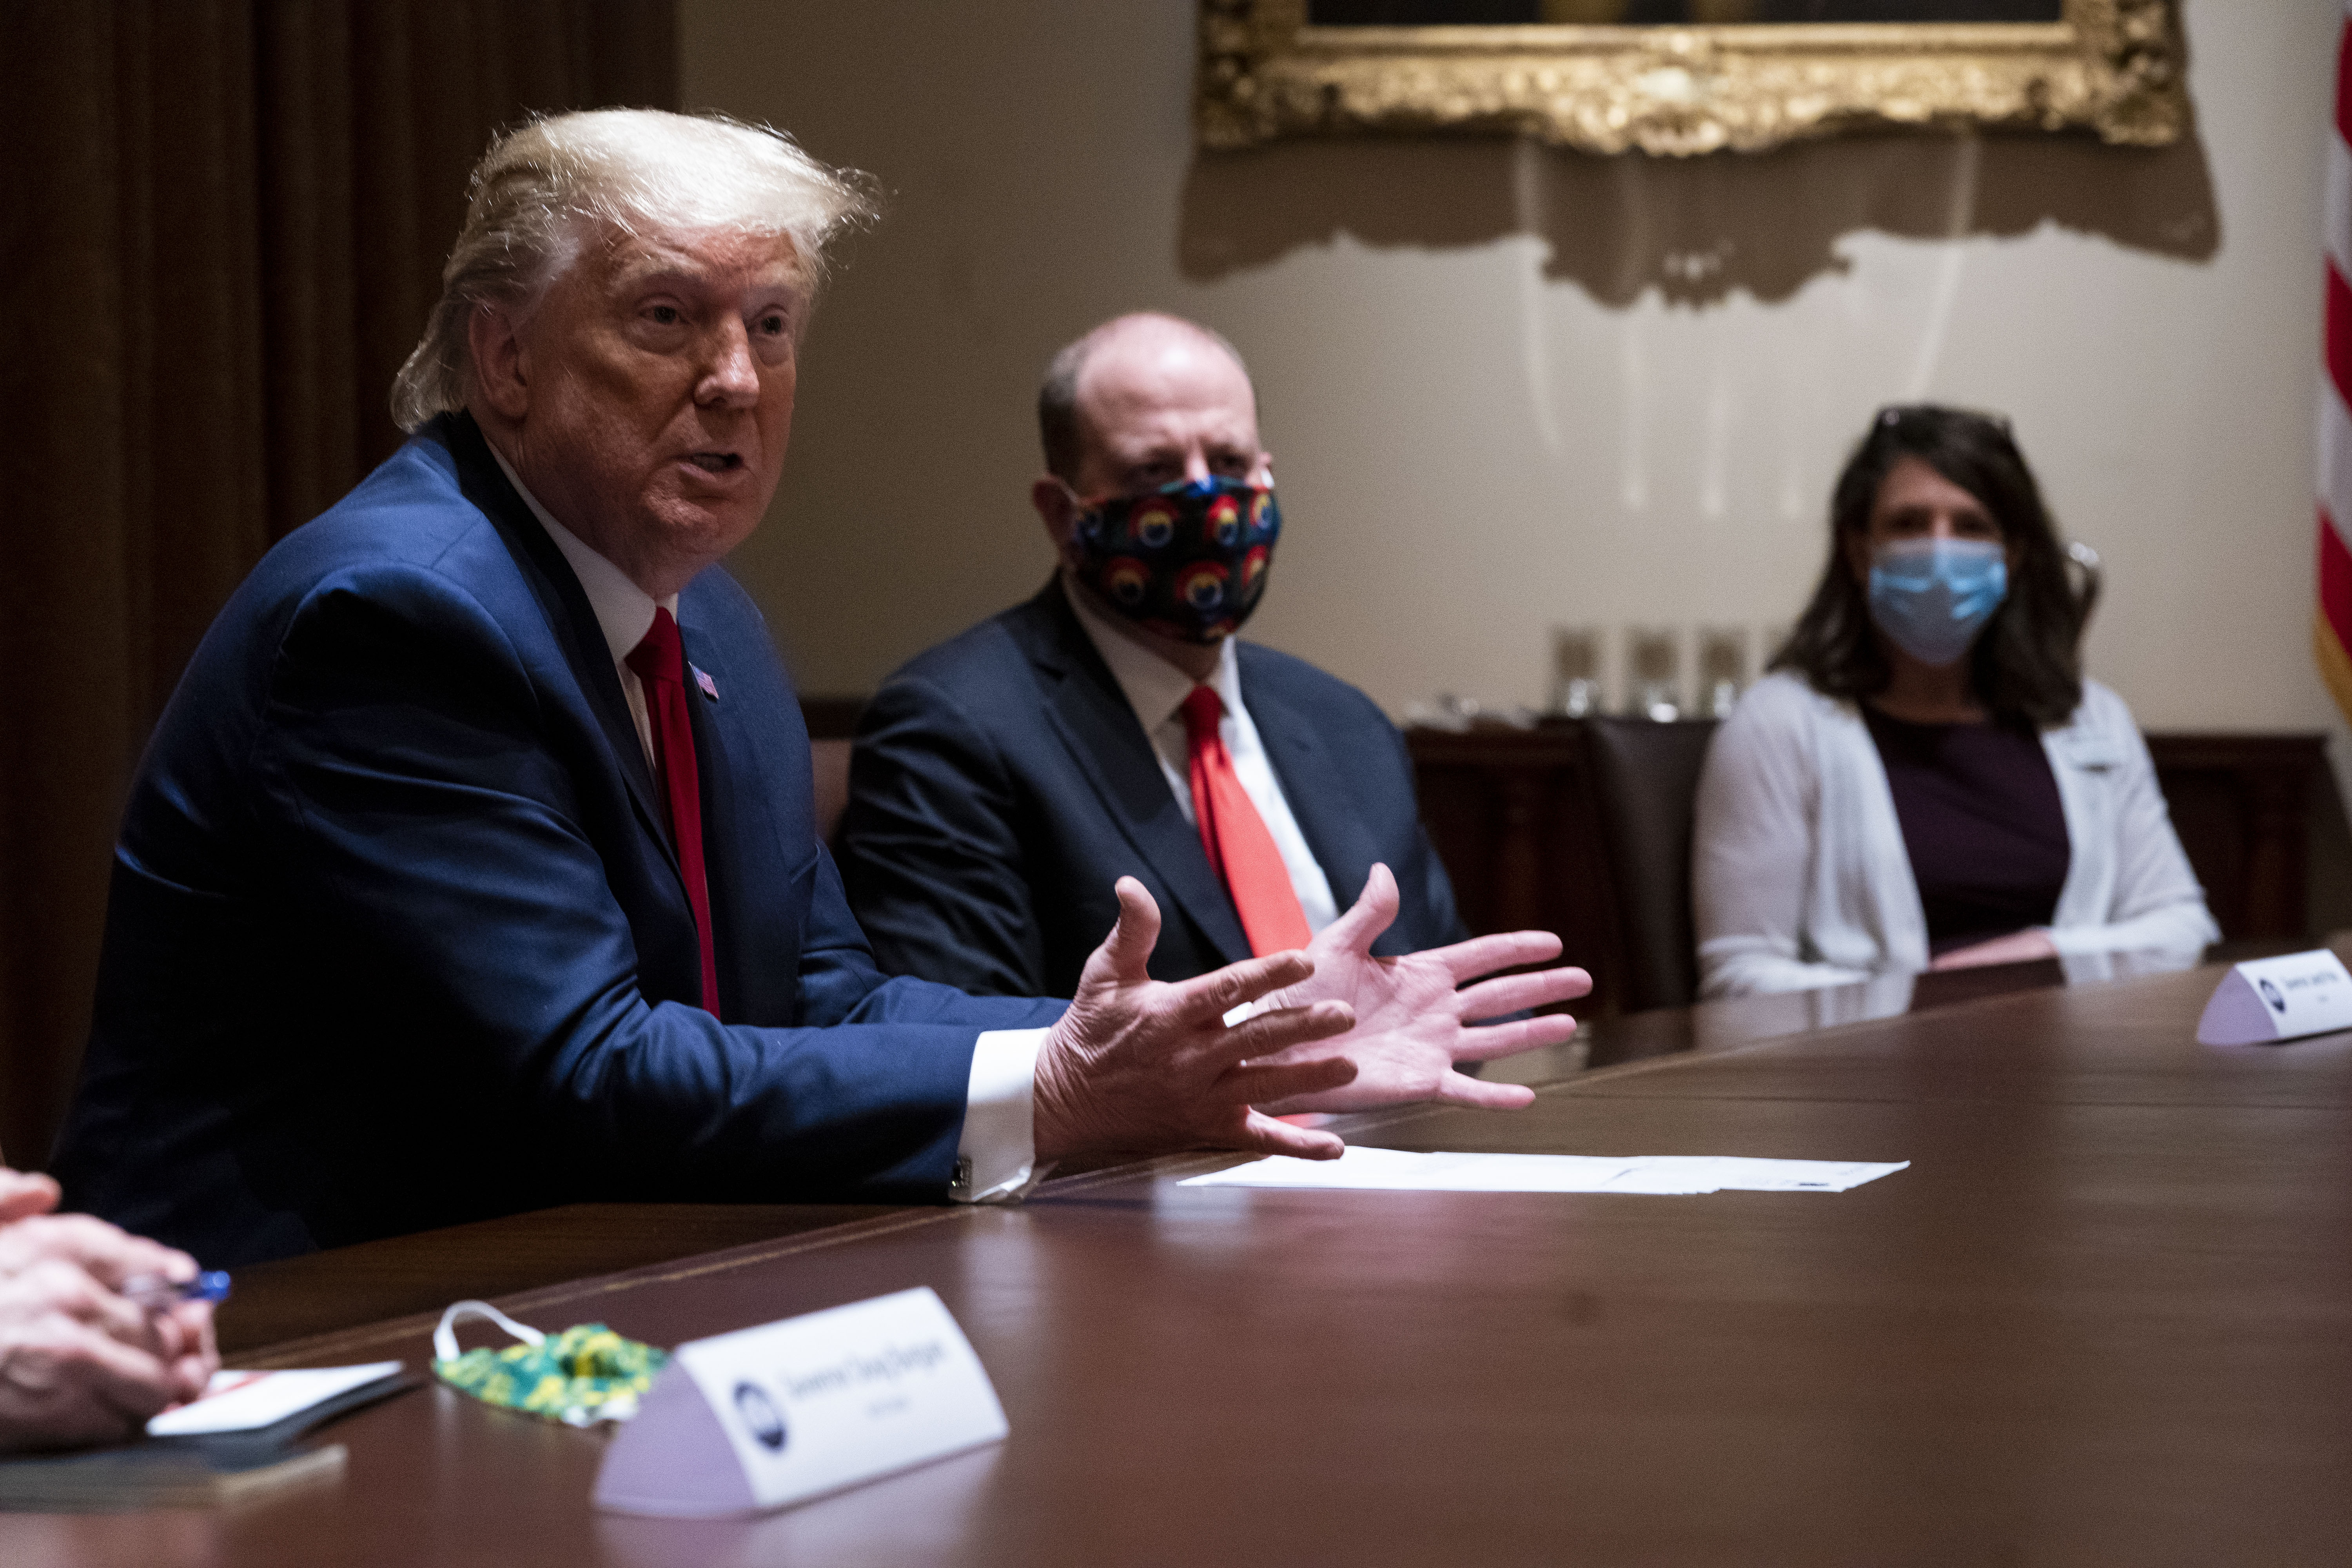 WASHINGTON, DC - MAY 13: Colorado Governor Jared Polis (C) wears a face mask as U.S. President Donald Trump makes remarks during a meeting in the Cabinet Room of the White House, May 13, 2020 in Washington, DC. (Photo by Doug Mills-Pool/Getty Images)